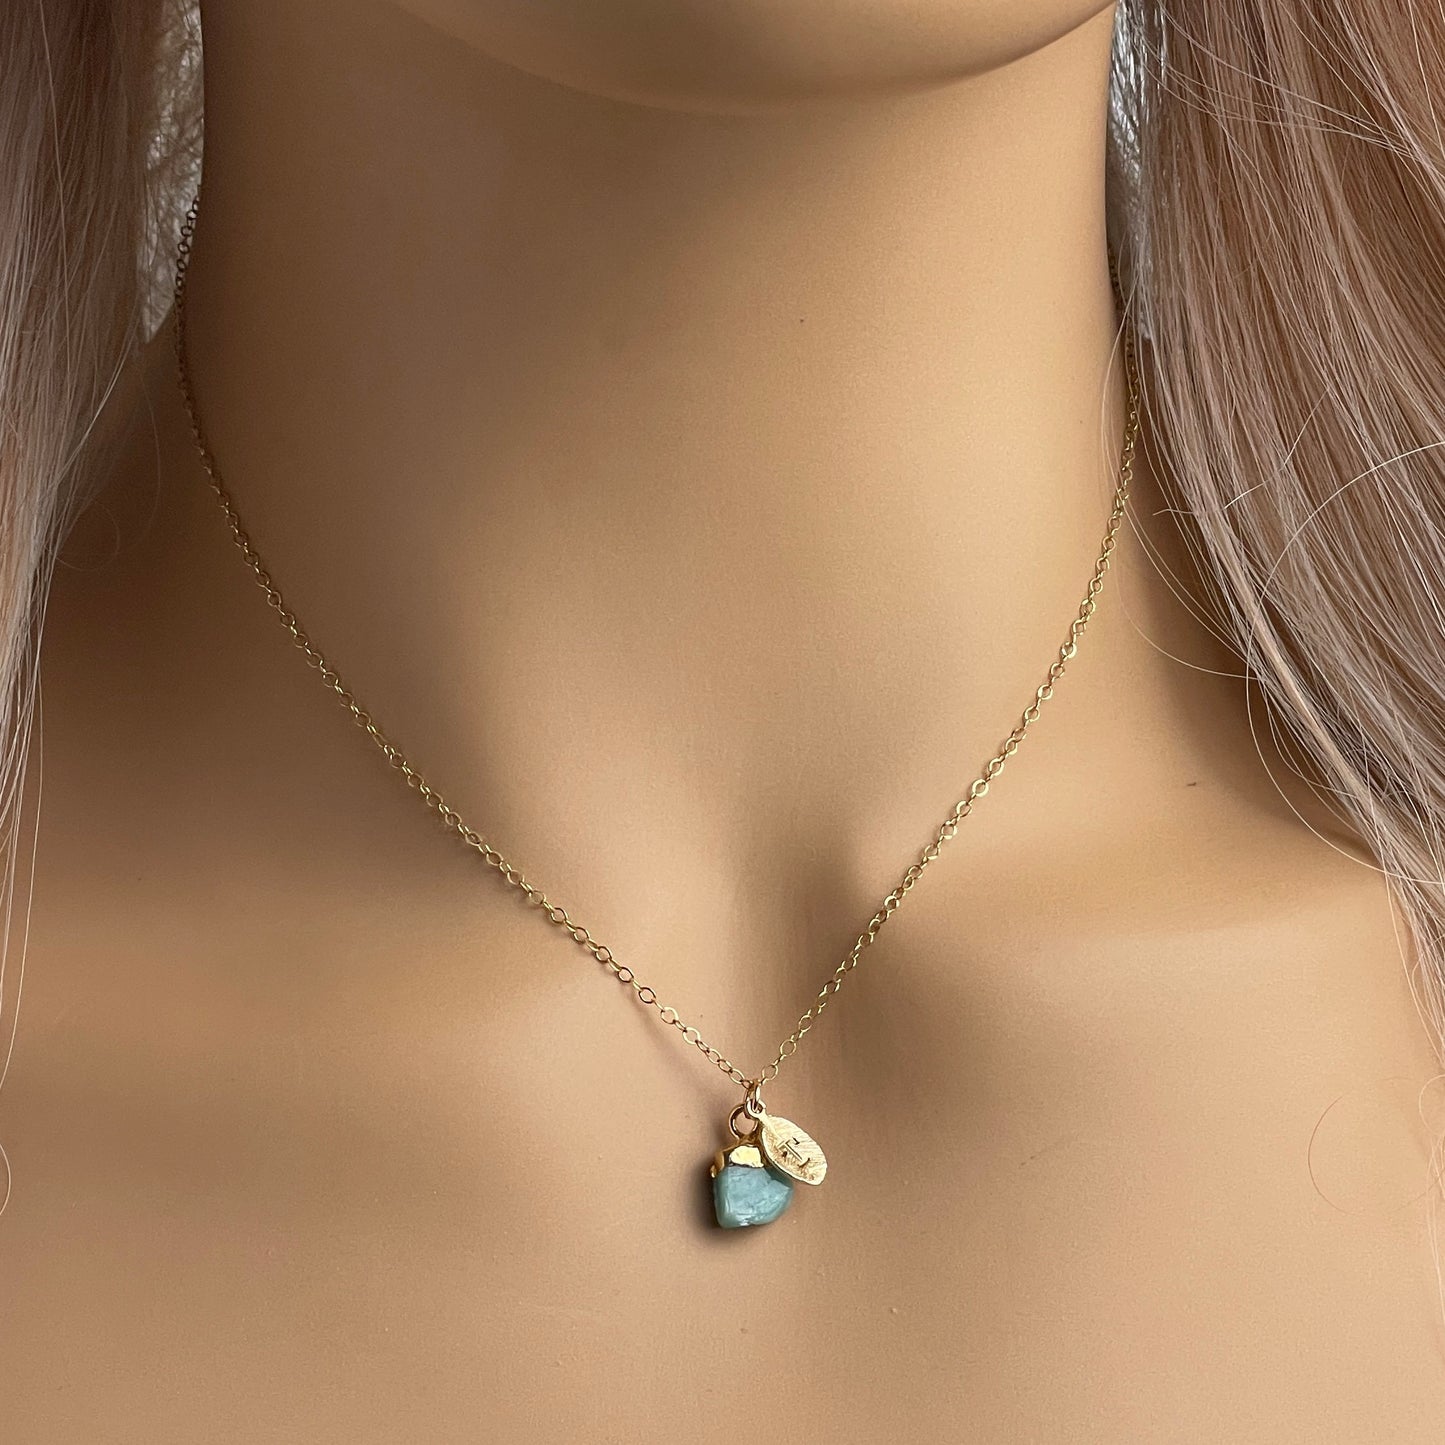 Small Raw Amazonite Necklace, Personalized Initial Charm, 14K Gold Filled Chain, Bridesmaid Gift, M6-45